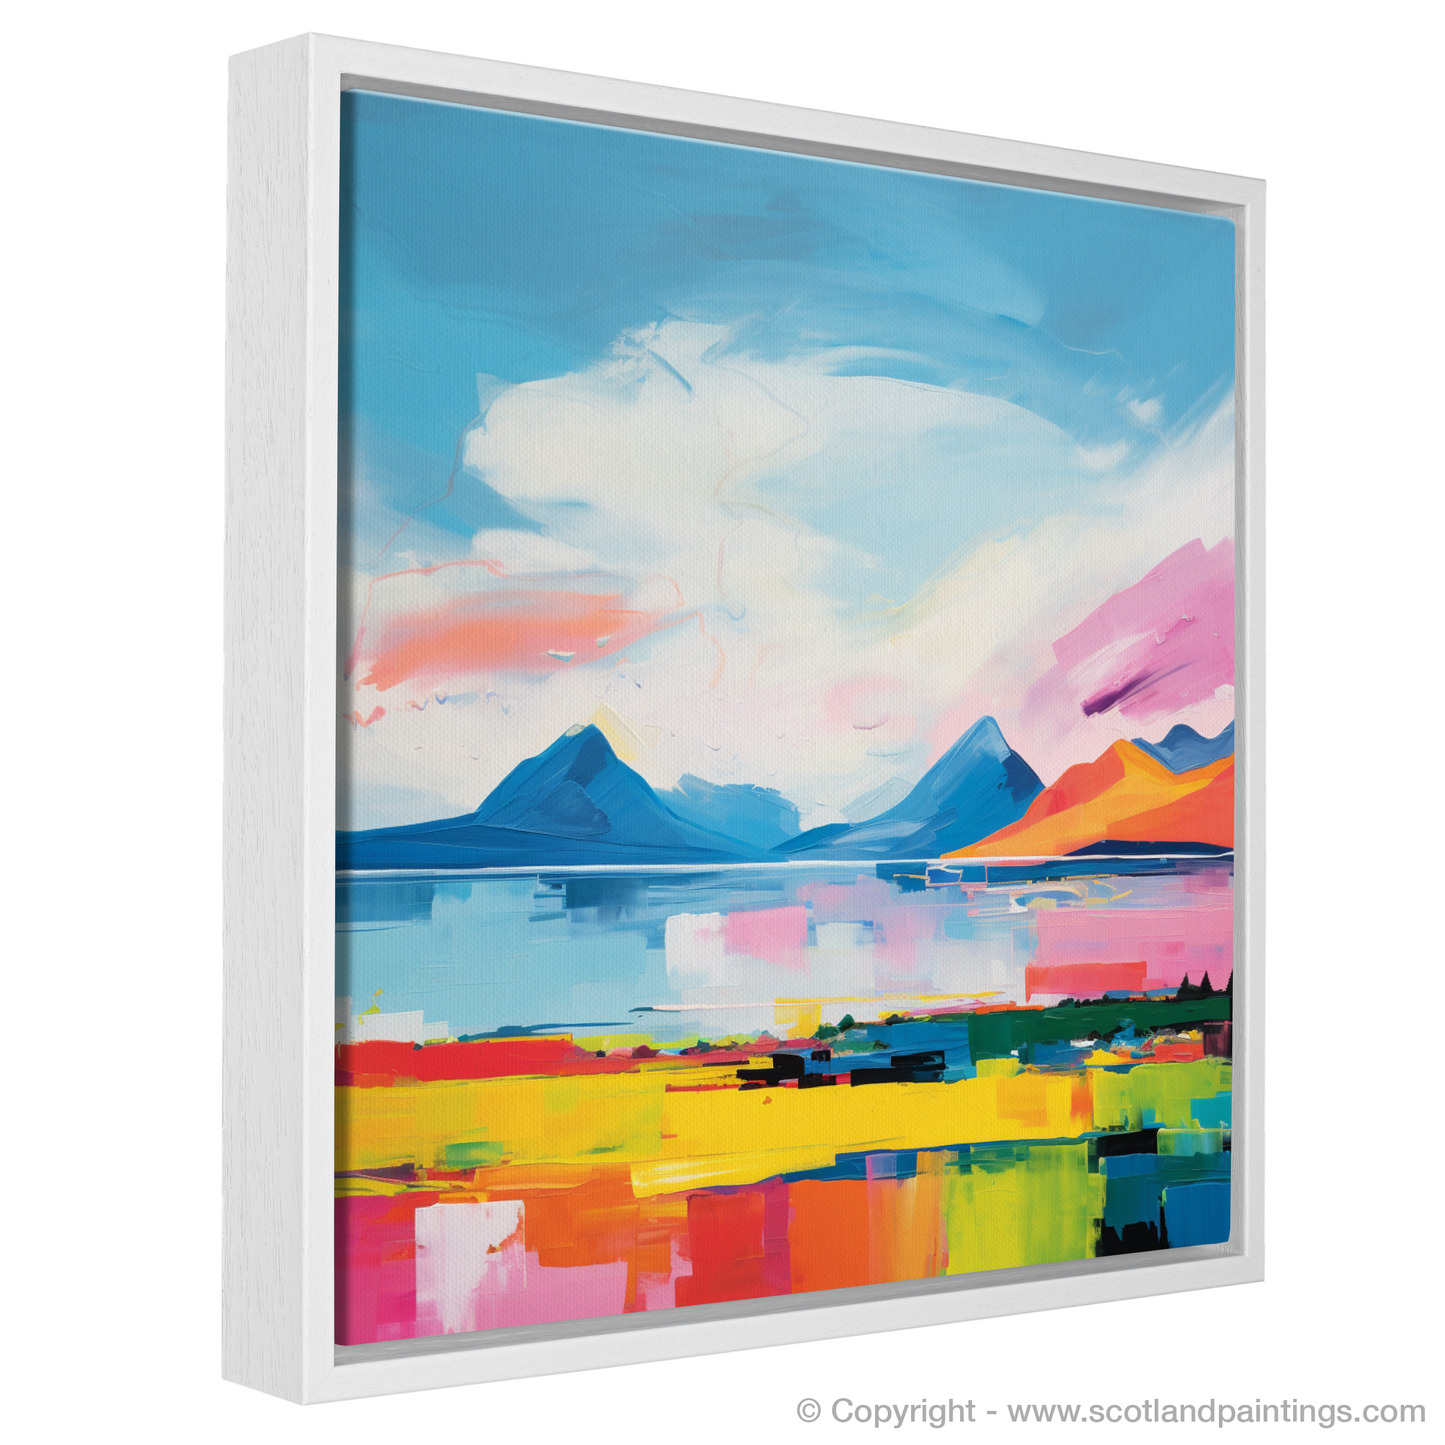 Painting and Art Print of Isle of Arran, Firth of Clyde in summer entitled "Summer Symphony on the Isle of Arran".